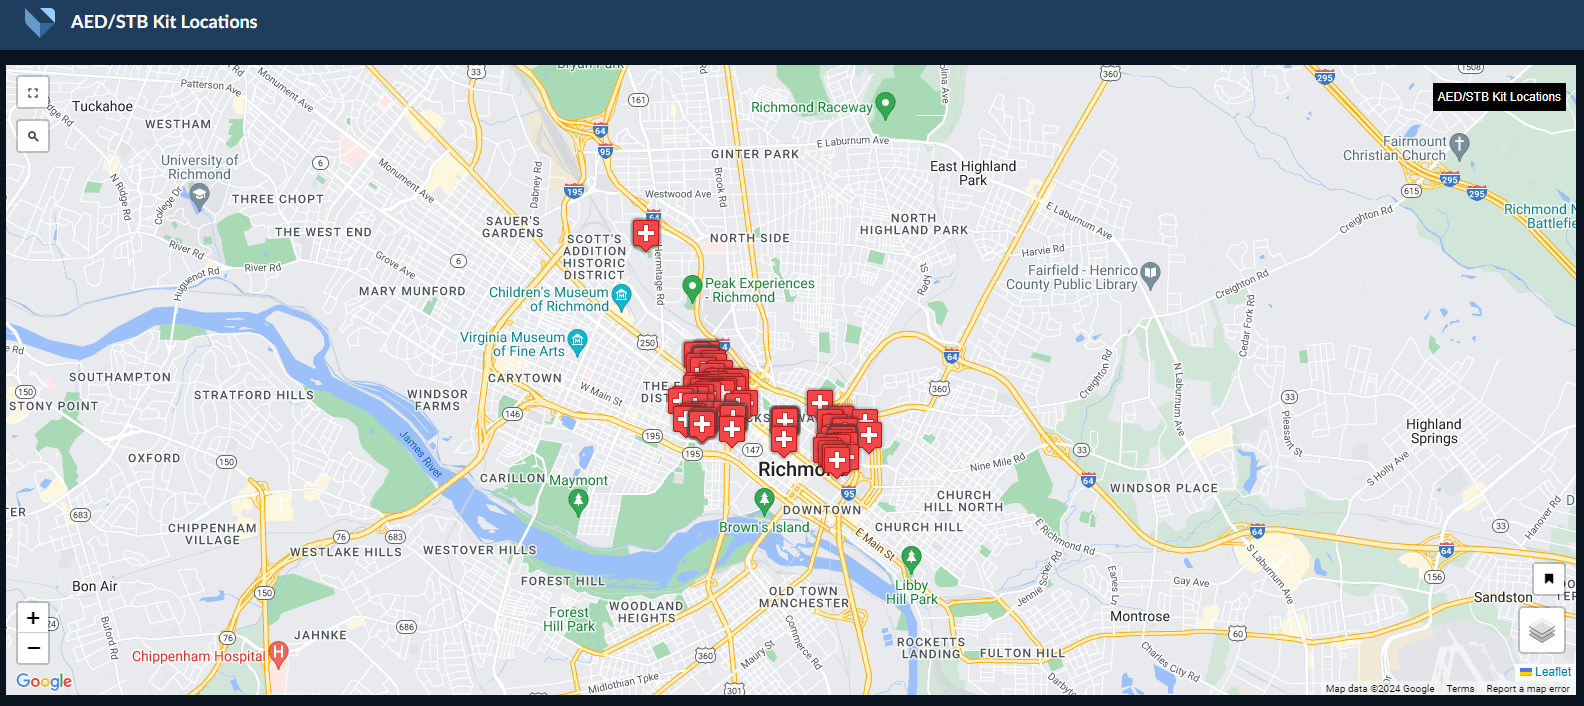 Static Image of AED Map